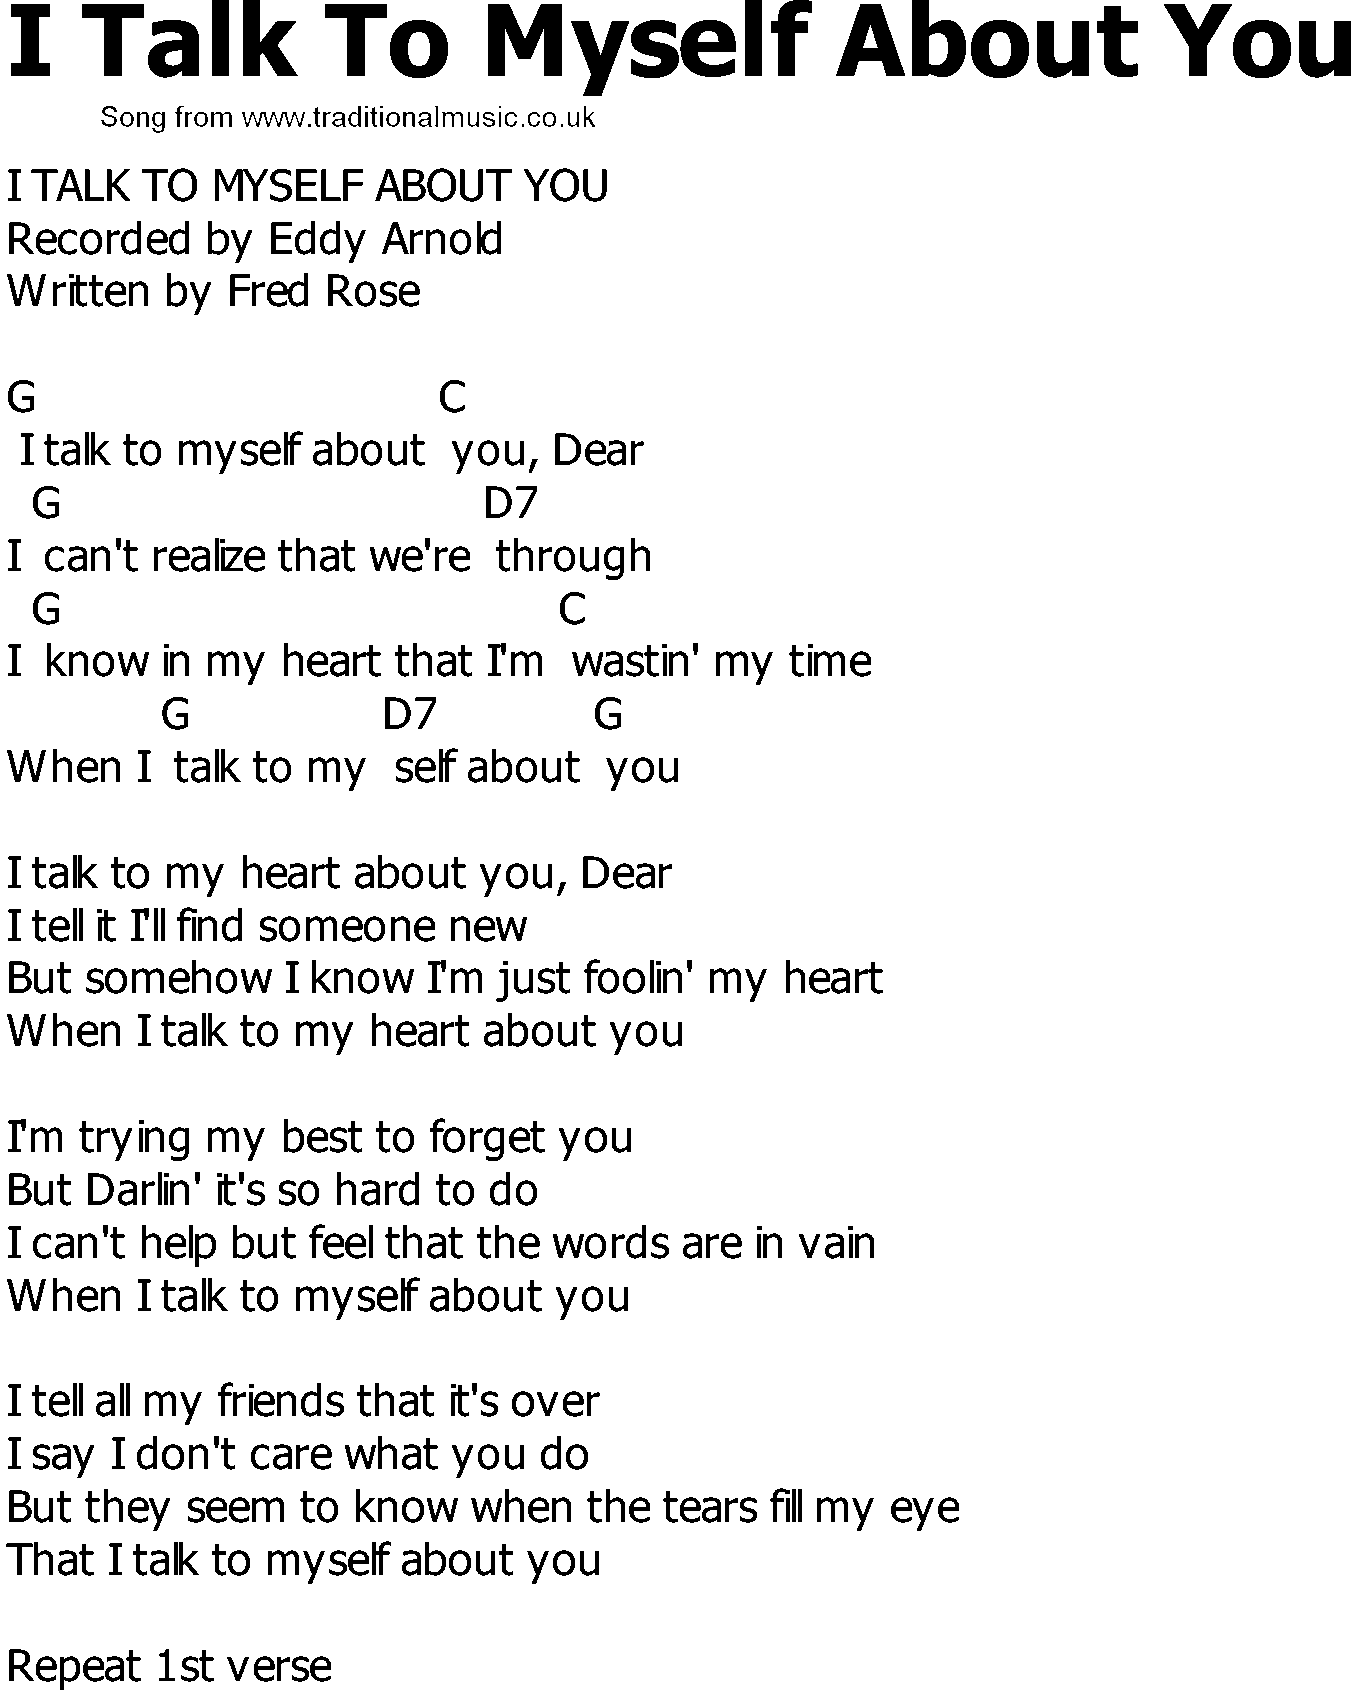 Old Country song lyrics with chords - I Talk To Myself About You